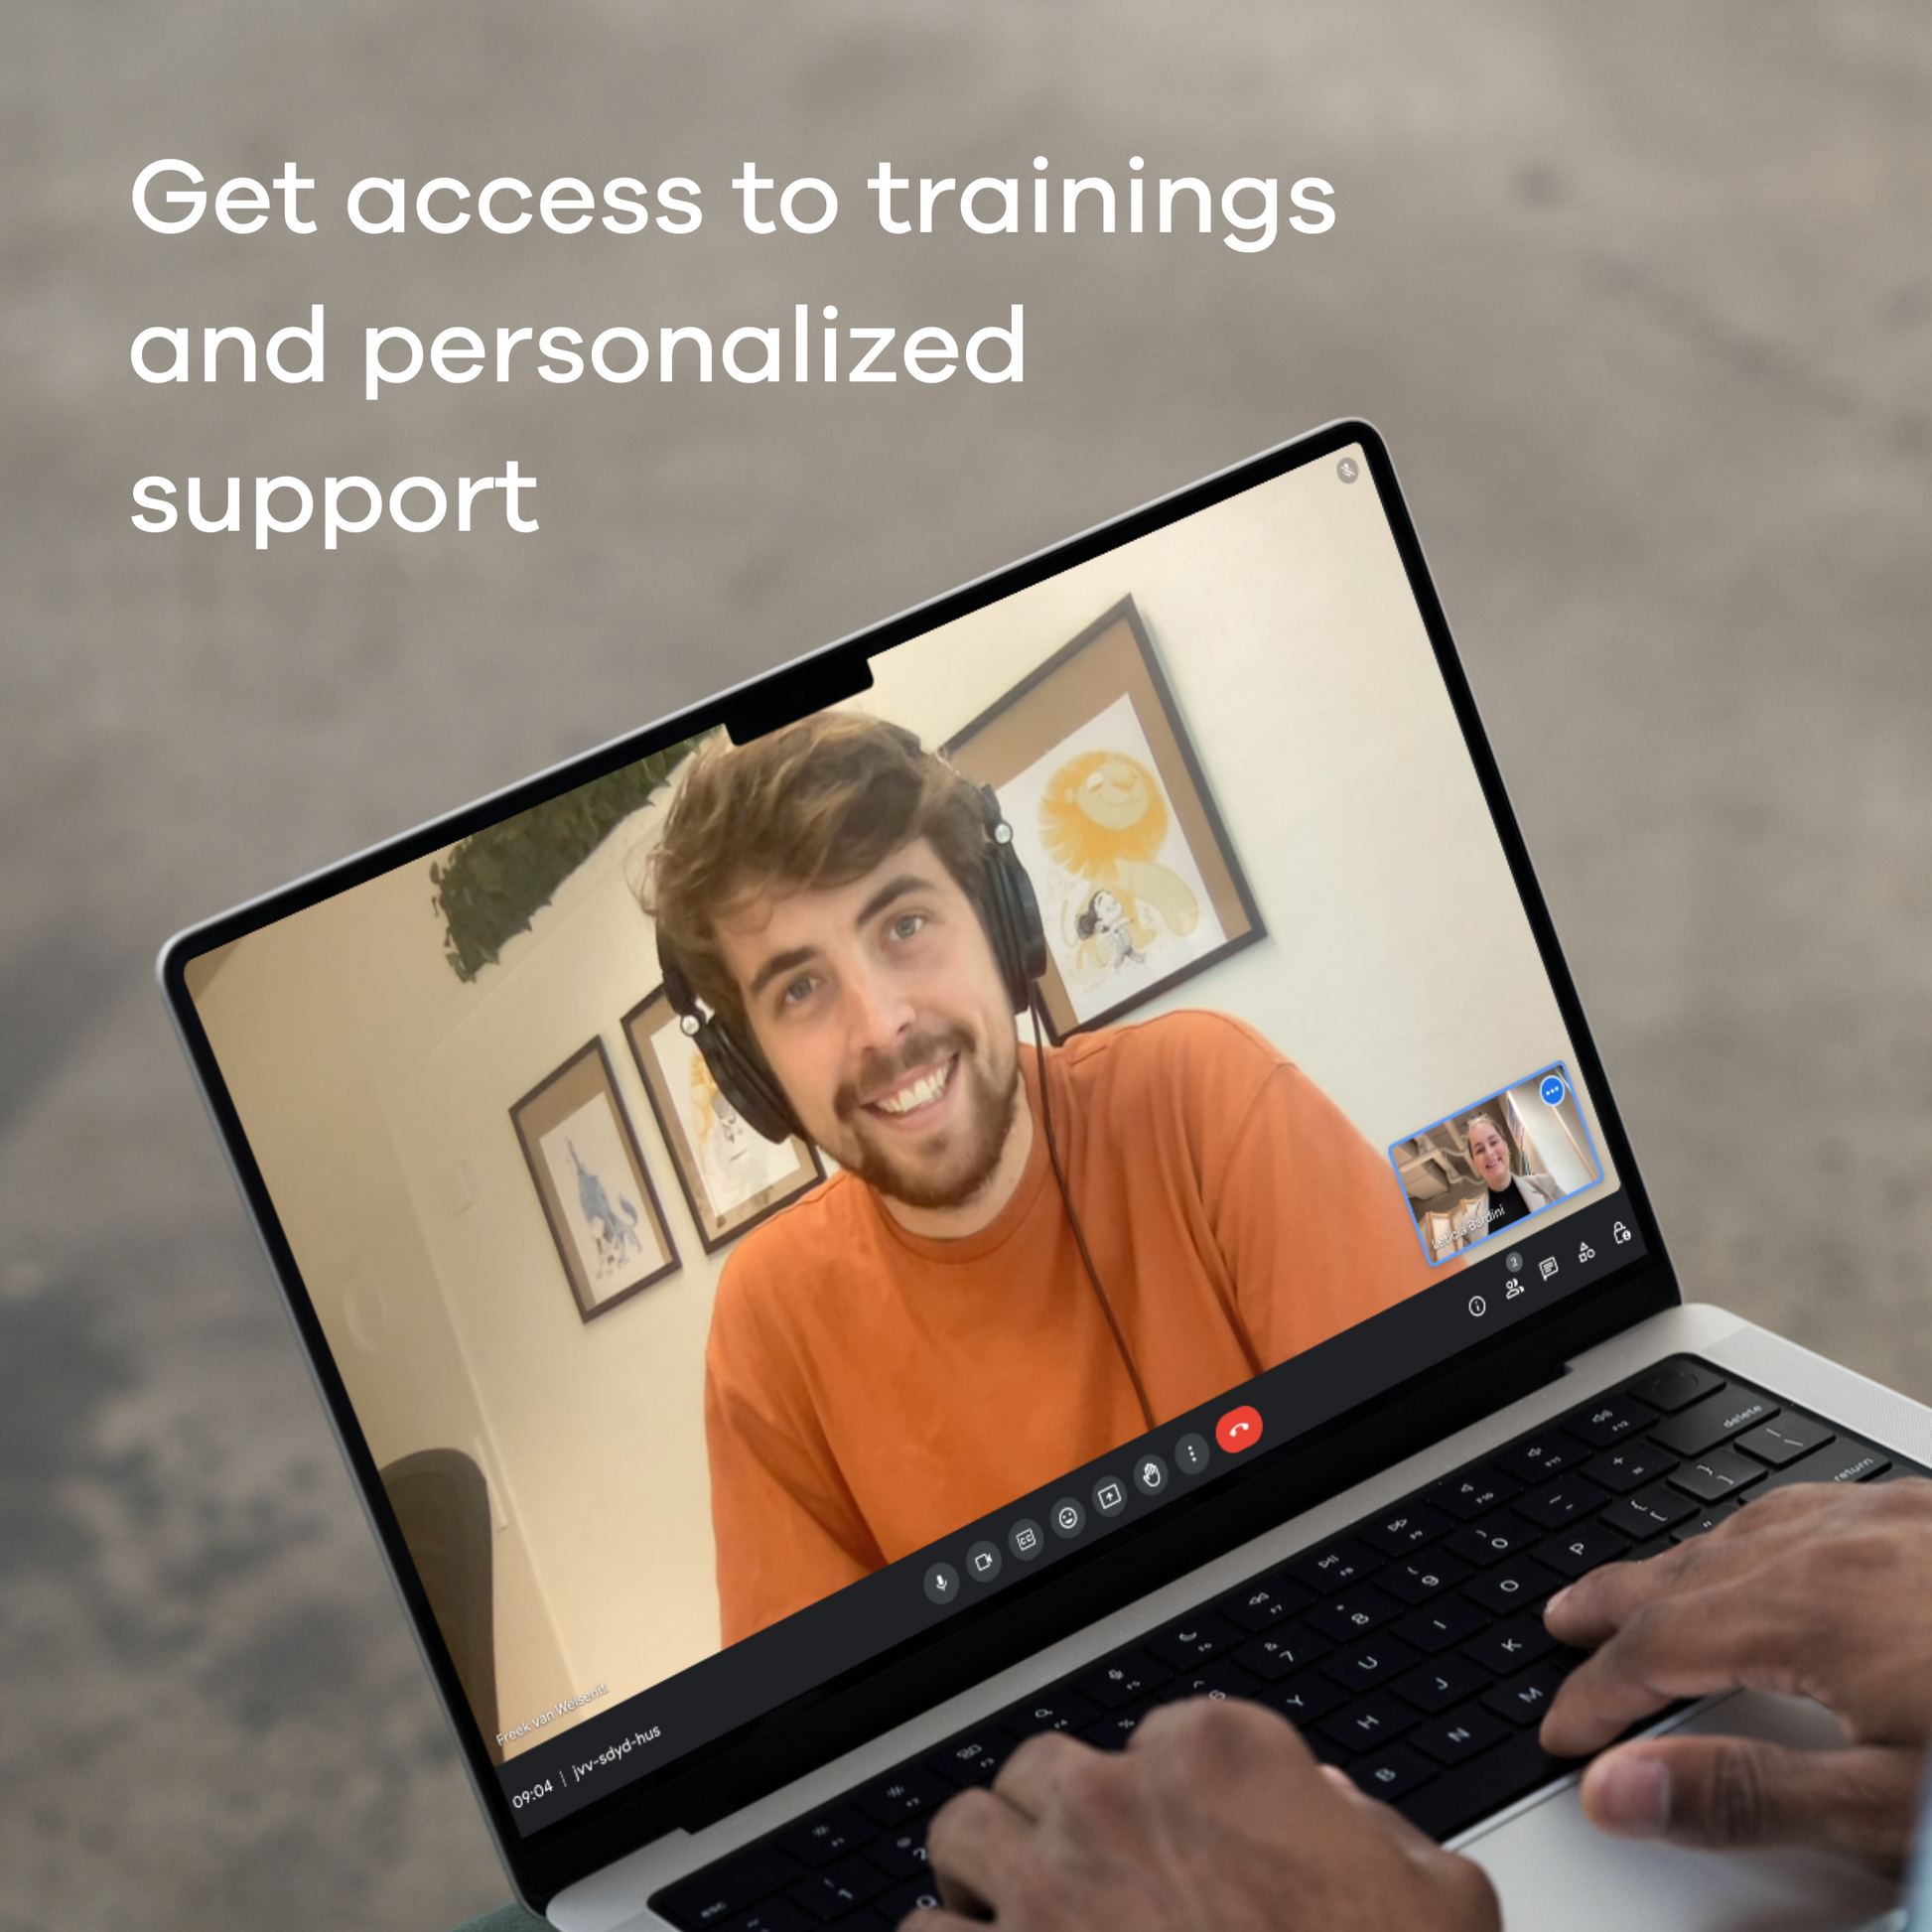 Once you receive your Hable One, you will gain access to training sessions and personalized support from our team, including a 30-minute call.